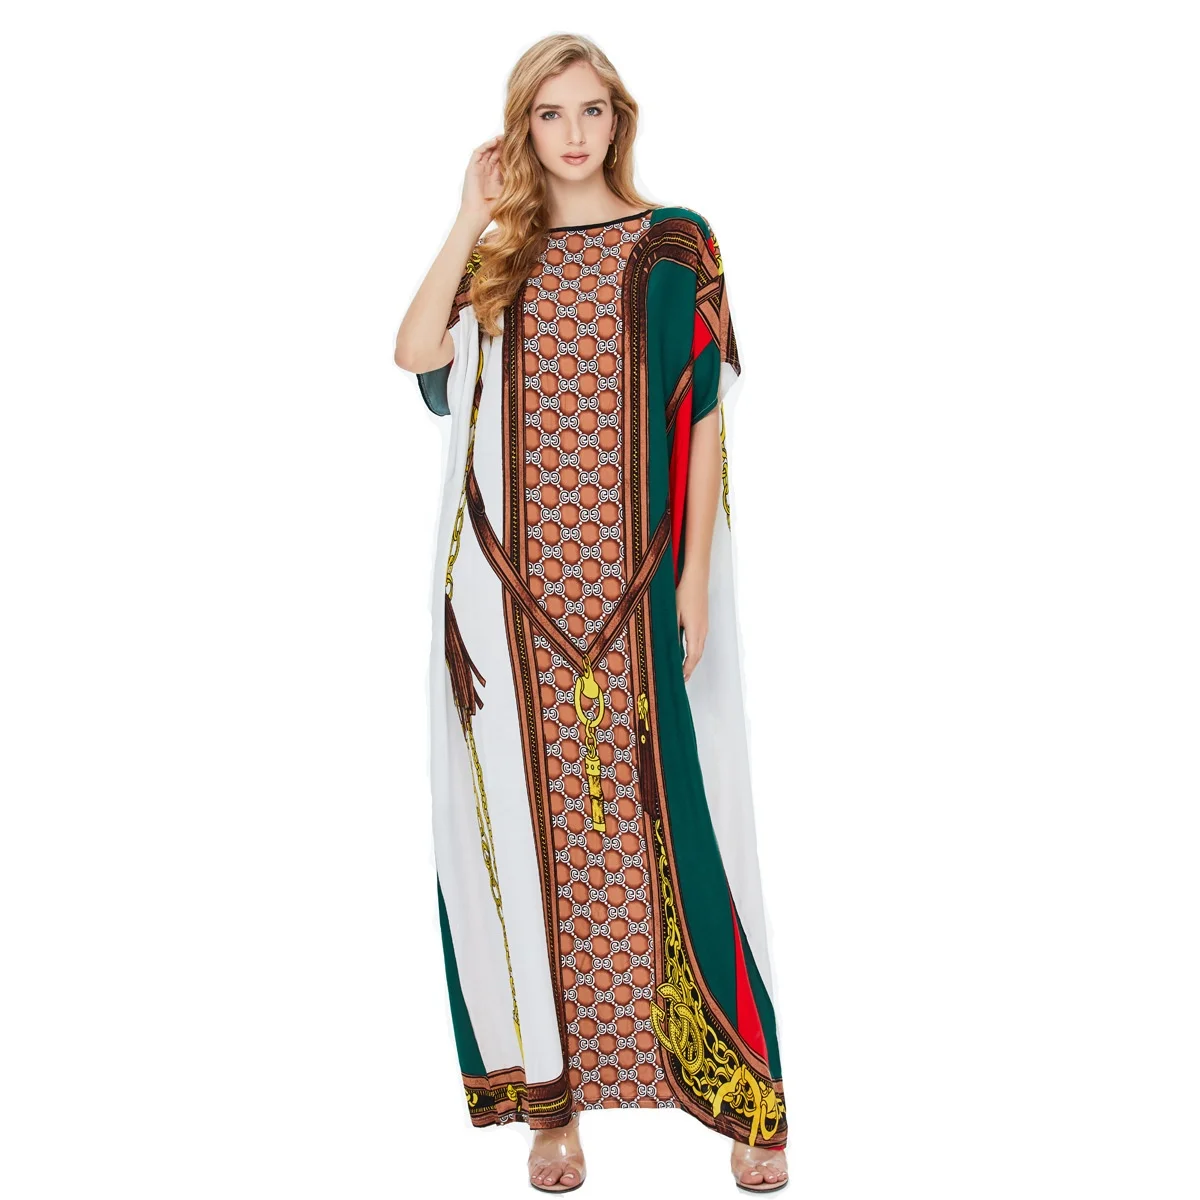 

Wholesale 2021 New Muslim Dress Pajamas Casual Long Maxi Dress Prayer Robe Islamic Clothing for Women, As picture shown, or custom colors